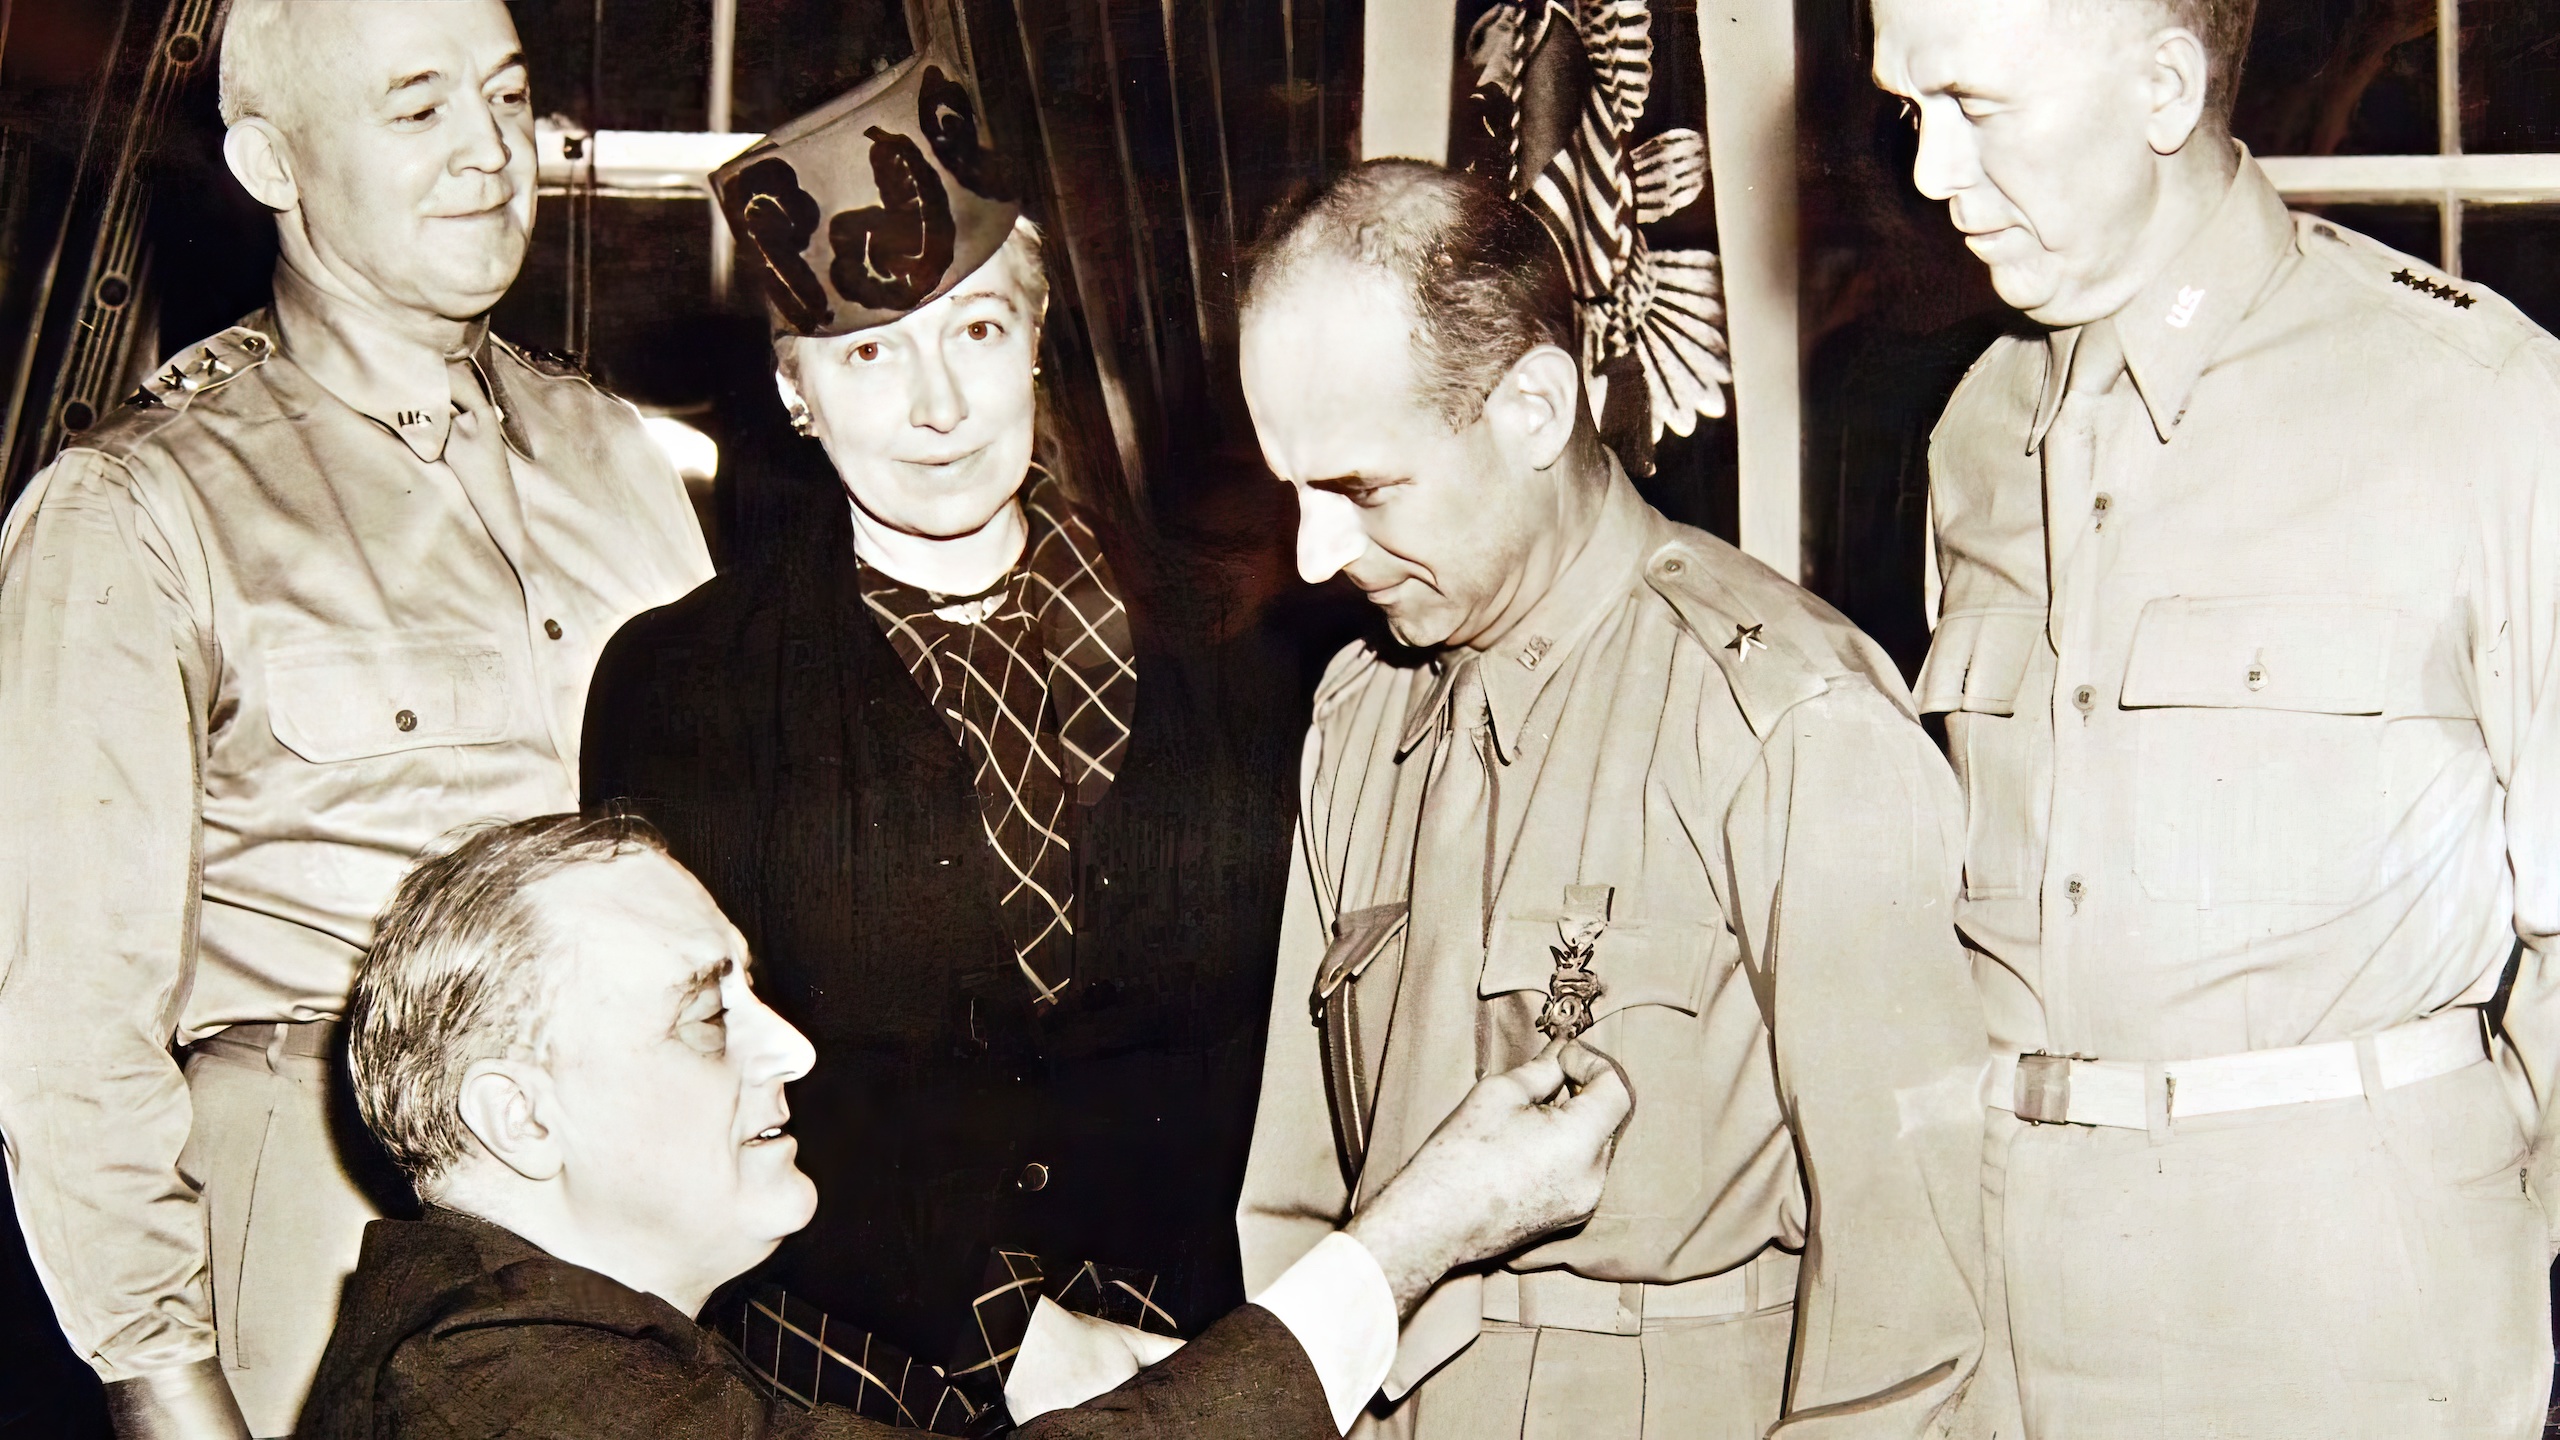 Doolittle received the Medal of Honor in 1942 from President Roosevelt